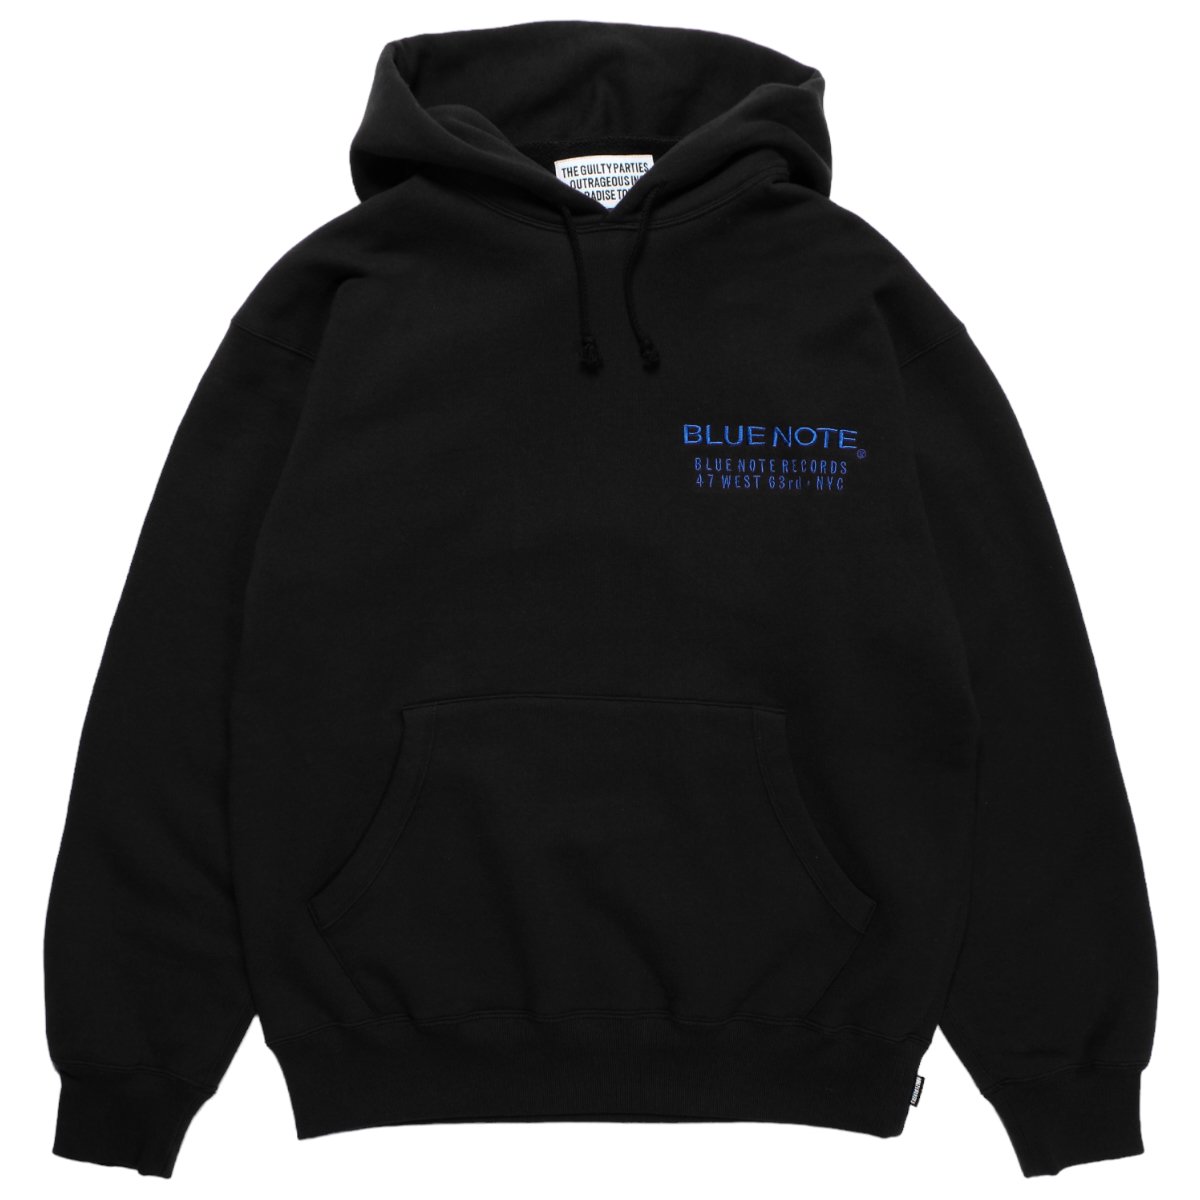 WACKOMARIA<BR>BLUE NOTE / MIDDLE WEIGHT PULLOVER HOODED SWEATSHIRT(TYPE-1)